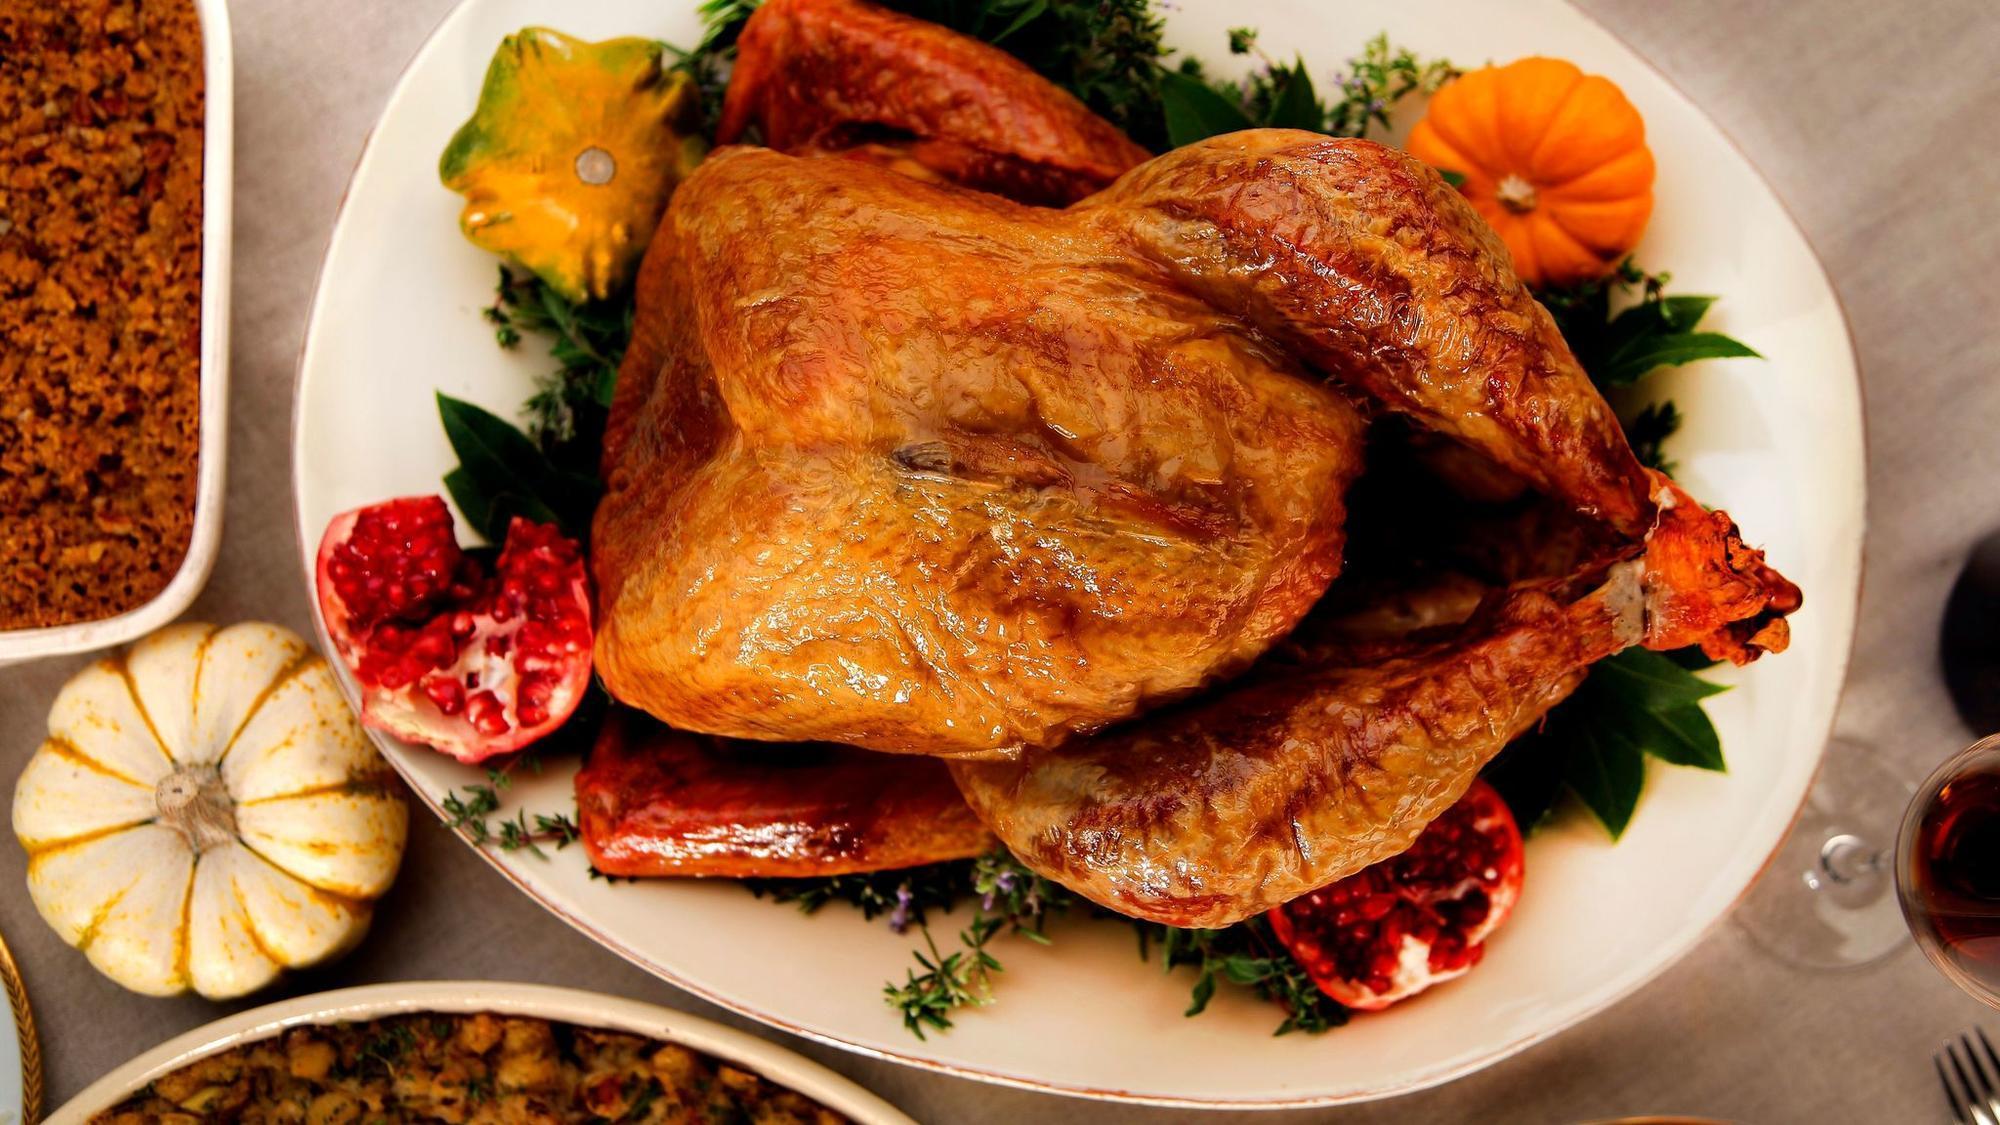 Turkey 101: How to cook a Thanksgiving turkey - LA Times